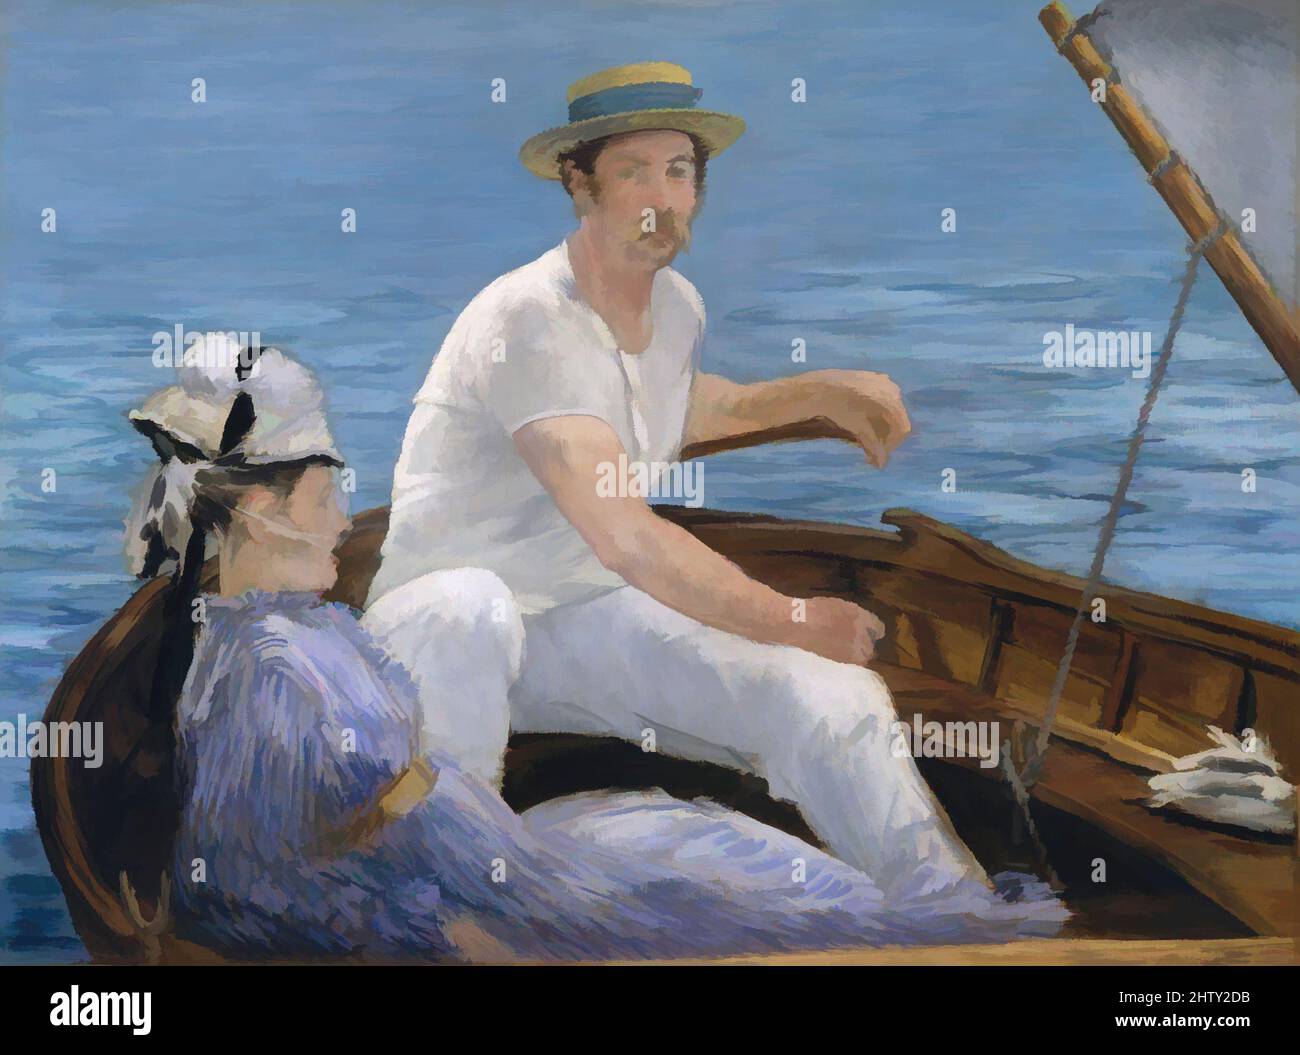 Art inspired by Boating, 1874, Oil on canvas, 38 1/4 x 51 1/4 in. (97.2 x 130.2 cm), Paintings, Édouard Manet (French, Paris 1832–1883 Paris), Manet summered at Gennevilliers in 1874, often spending time with Monet and Renoir across the Seine at Argenteuil, where Boating was painted, Classic works modernized by Artotop with a splash of modernity. Shapes, color and value, eye-catching visual impact on art. Emotions through freedom of artworks in a contemporary way. A timeless message pursuing a wildly creative new direction. Artists turning to the digital medium and creating the Artotop NFT Stock Photo